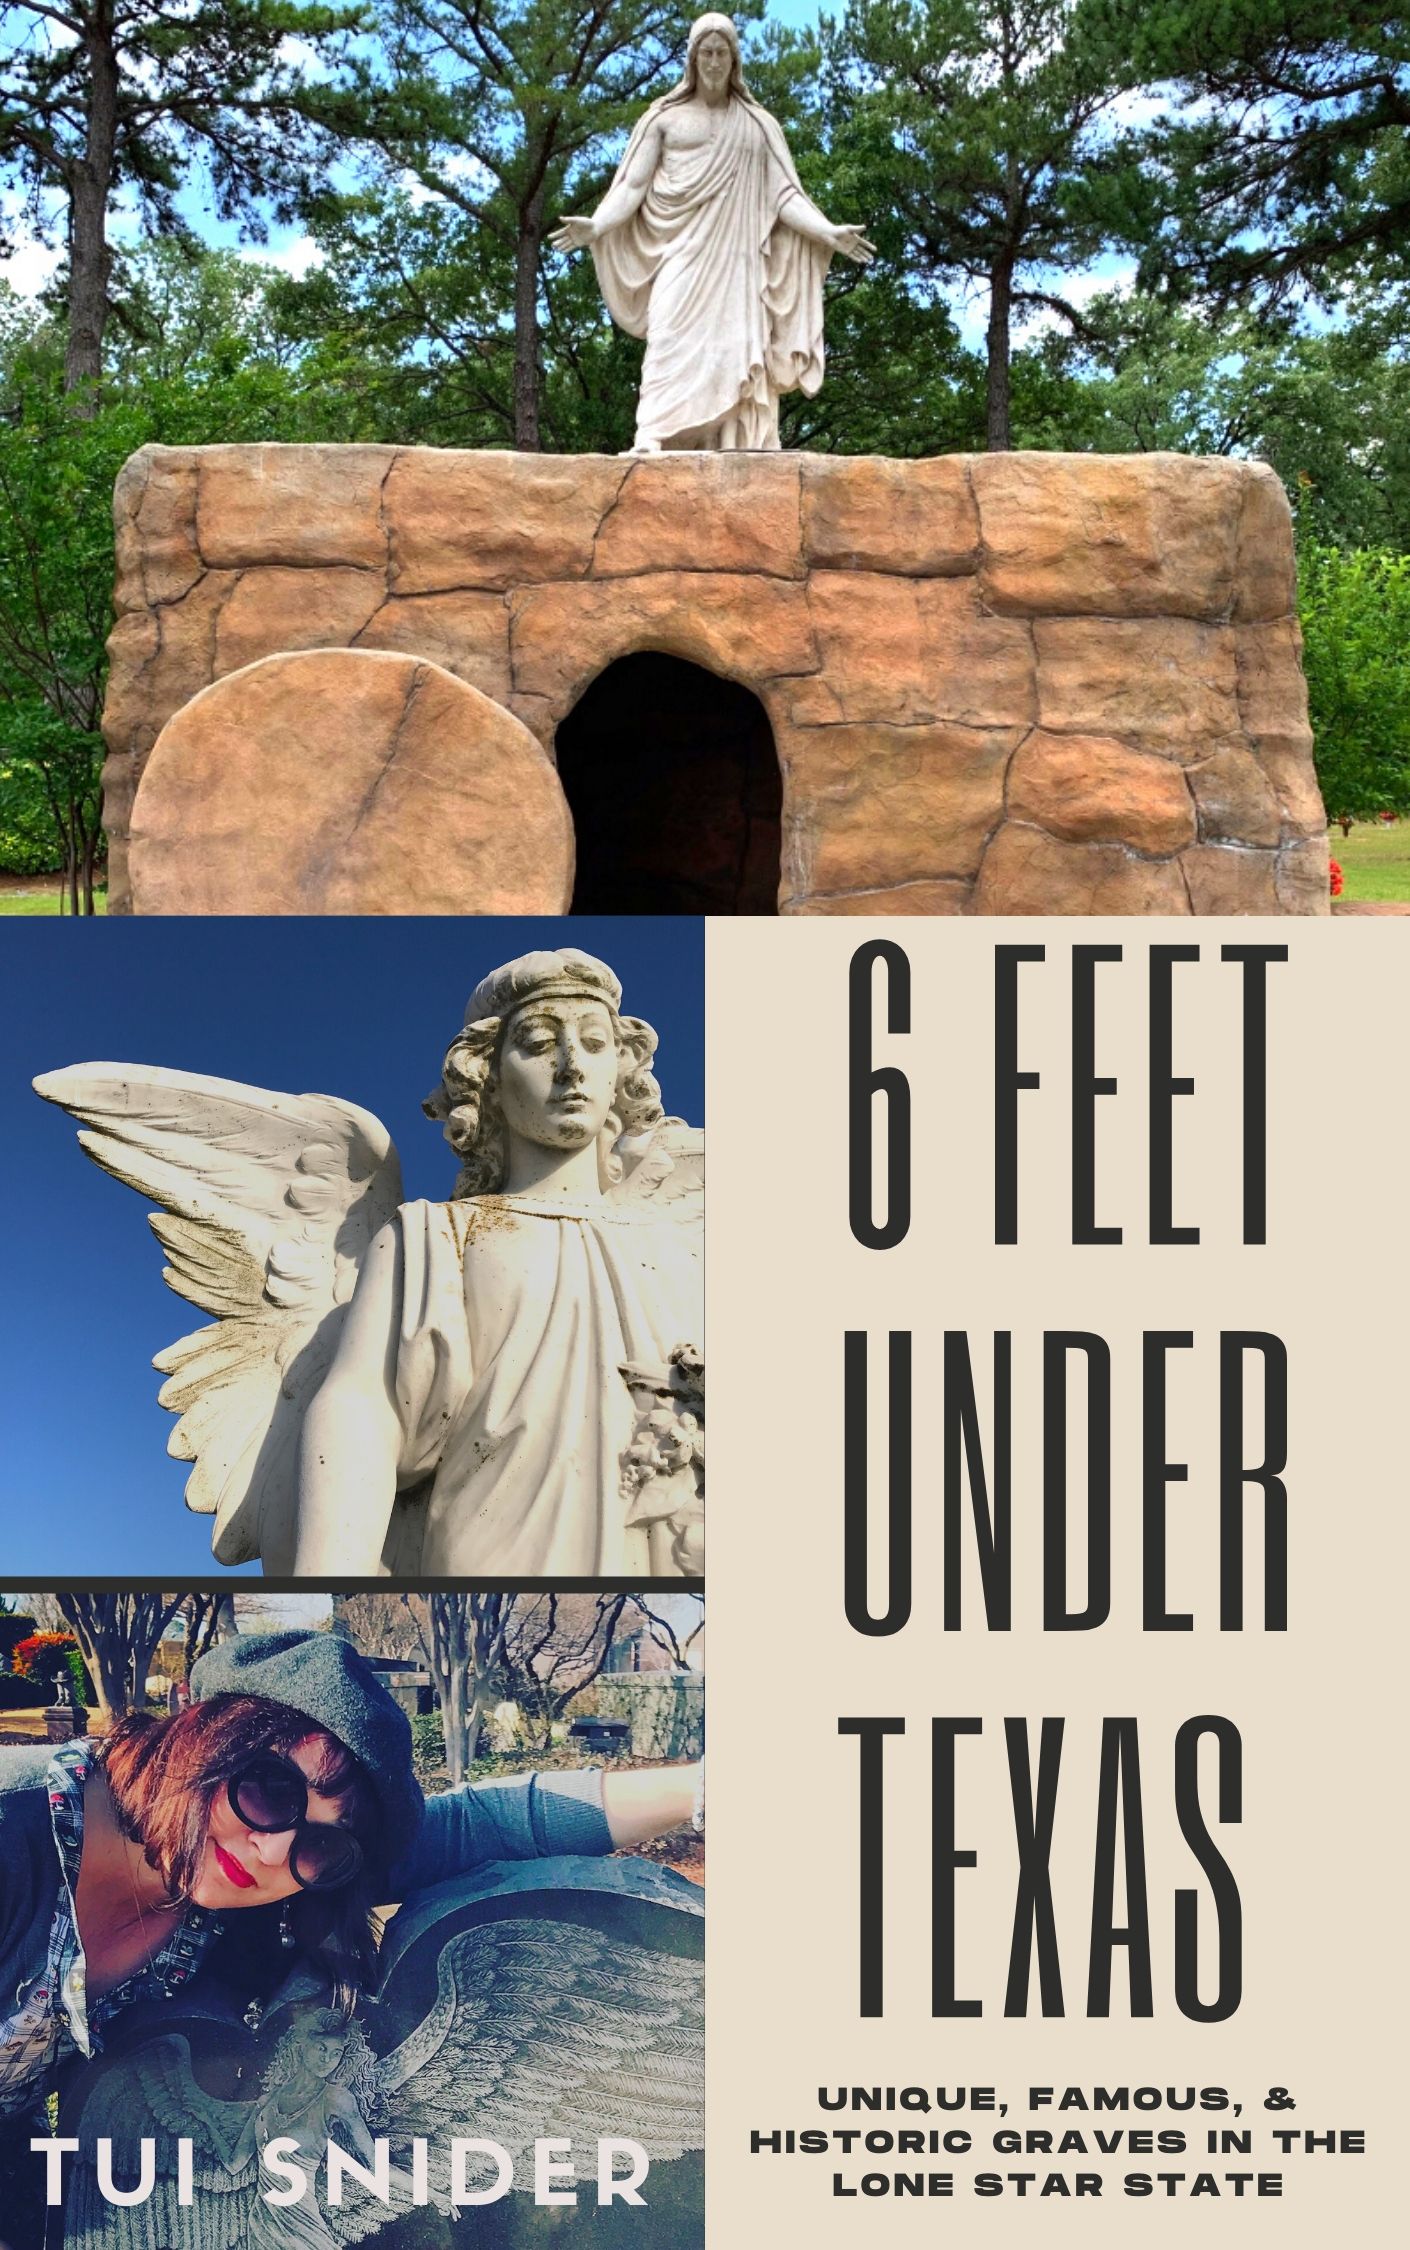 SIX FEET UNDER TEXAS:  Unique, Famous, & Historic Graves in the Lone Star State